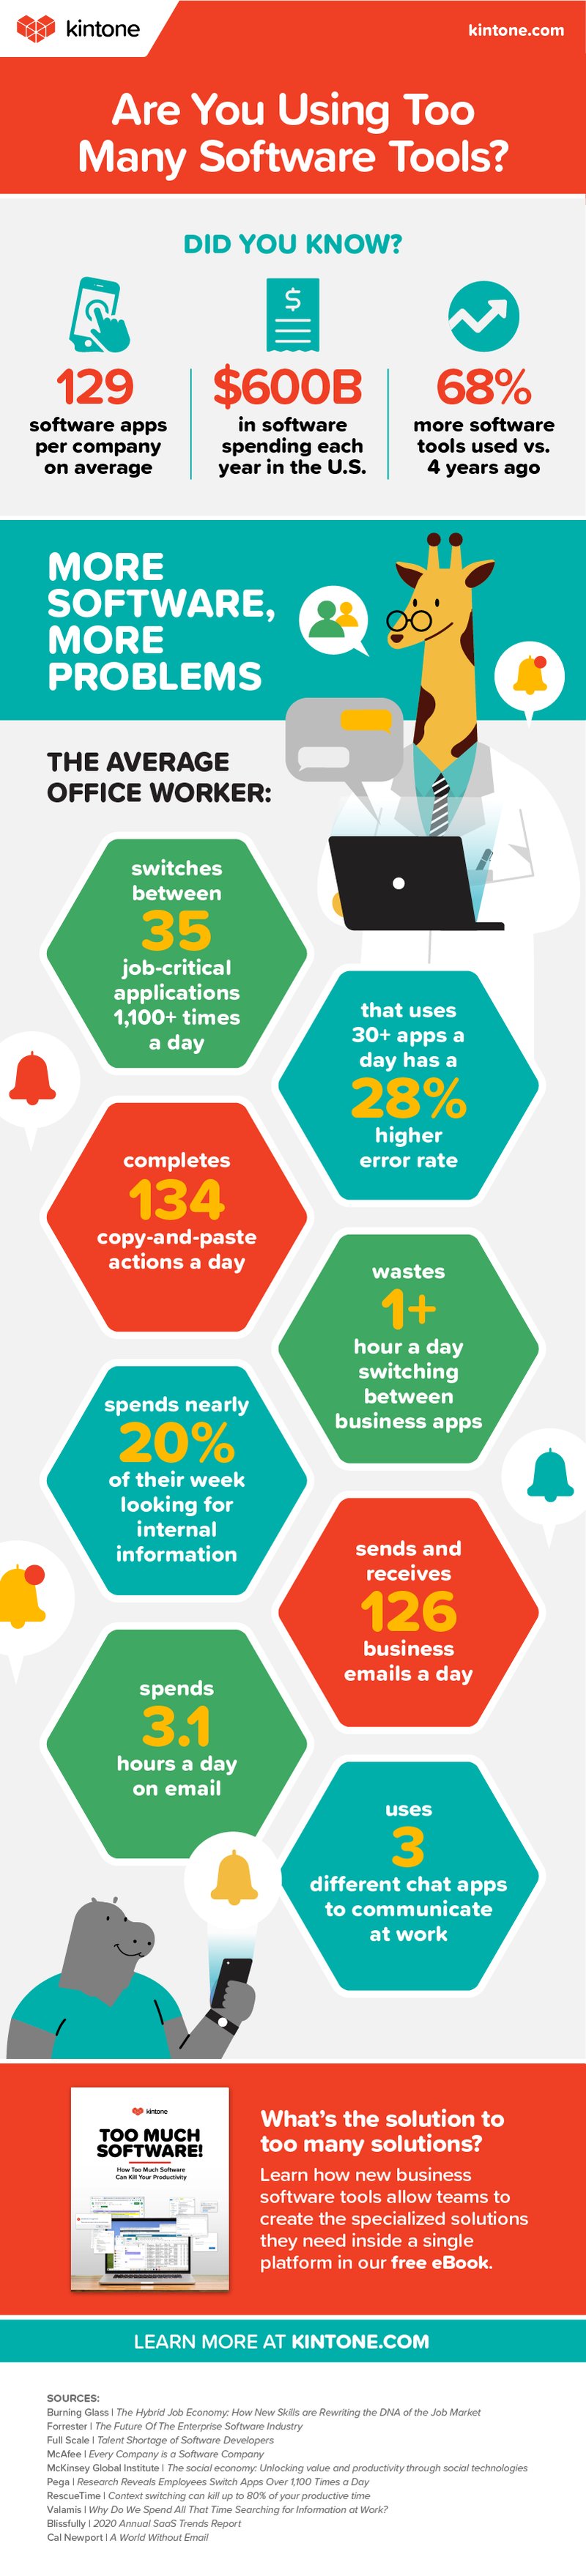 Data Silos infographic - too much software